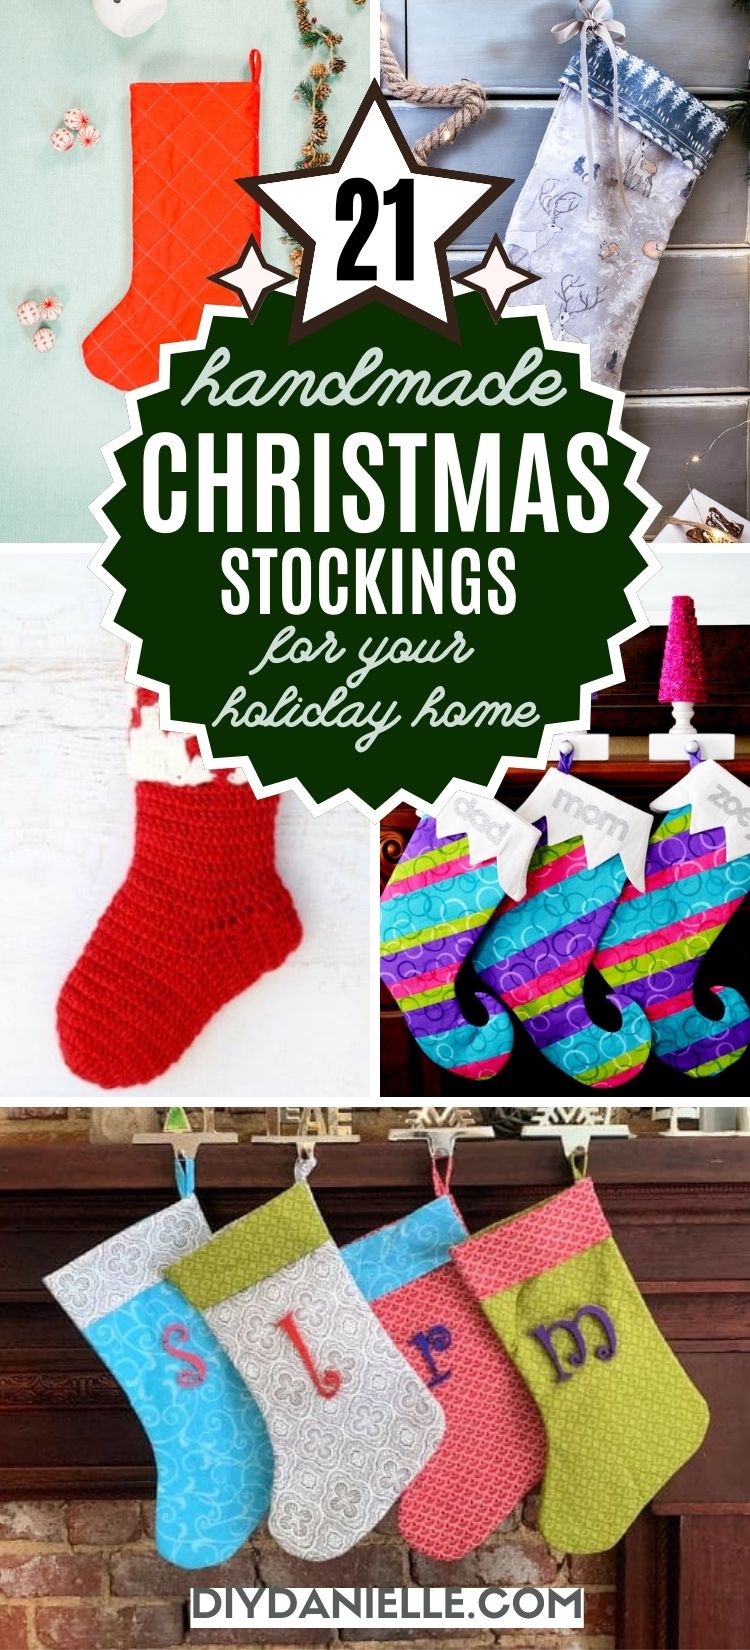 pin collage handmade Christmas stockings with text